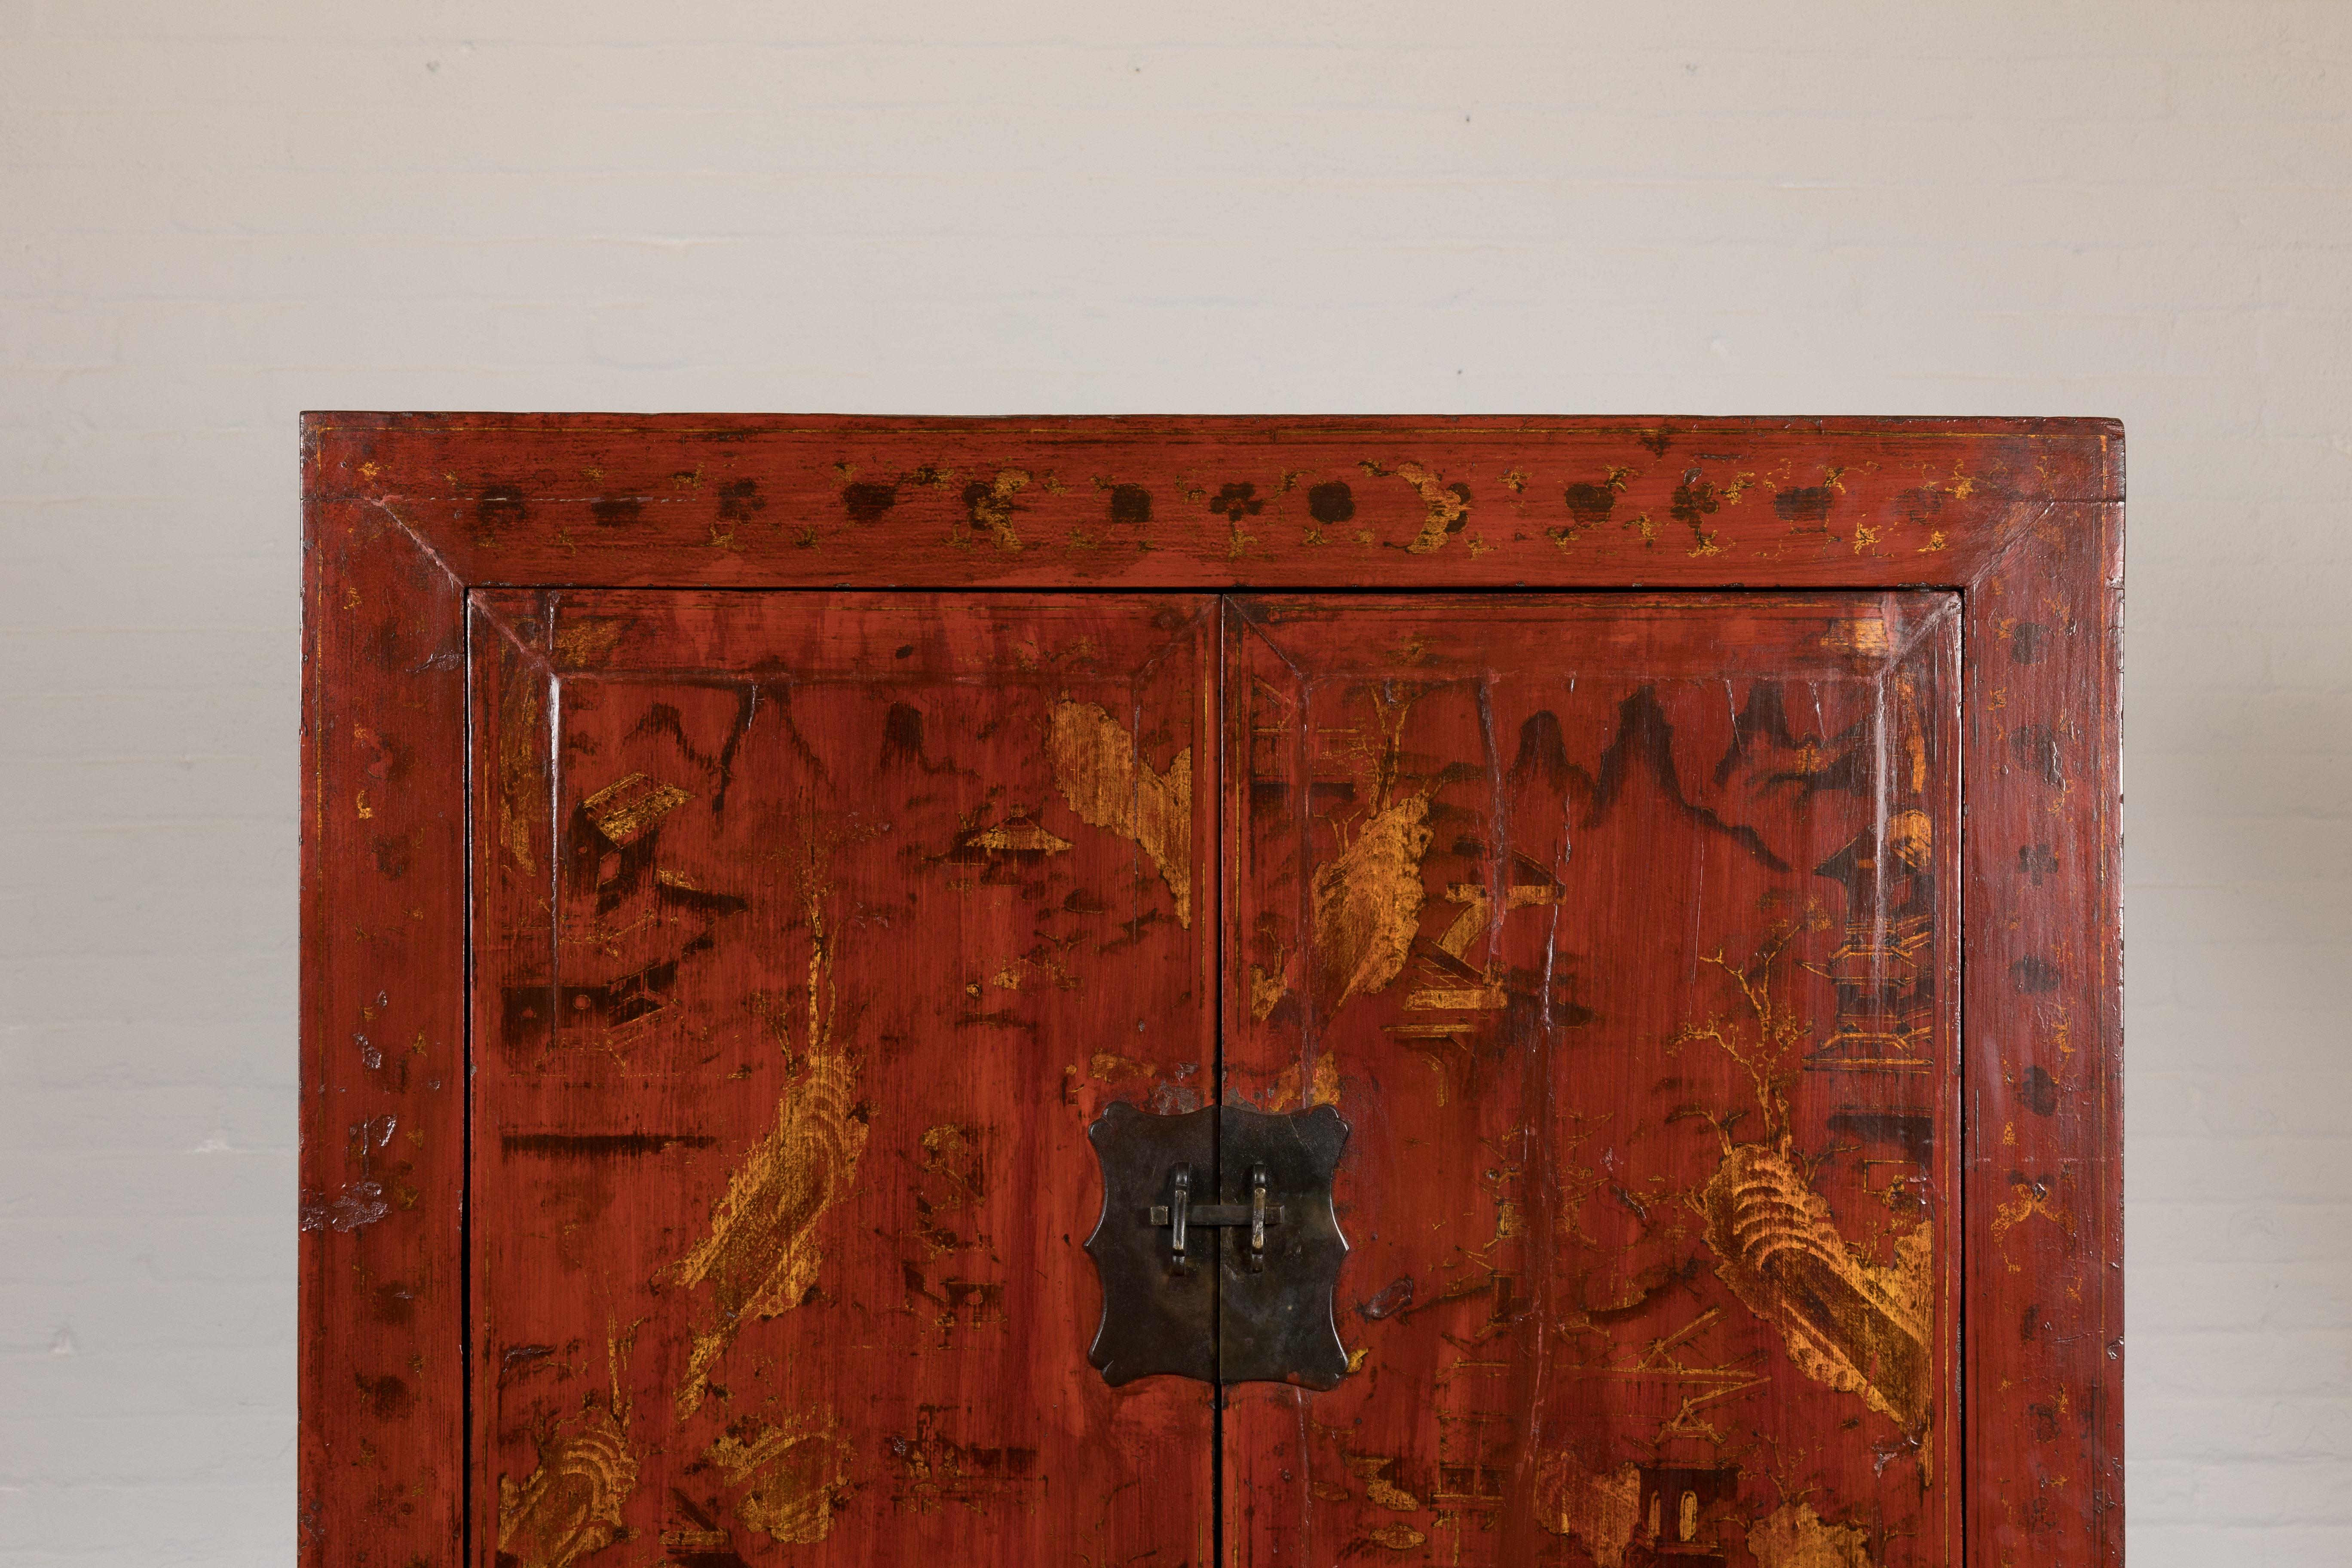 Lacquered Large Red Antique Cabinet with Gold Painted Scenes